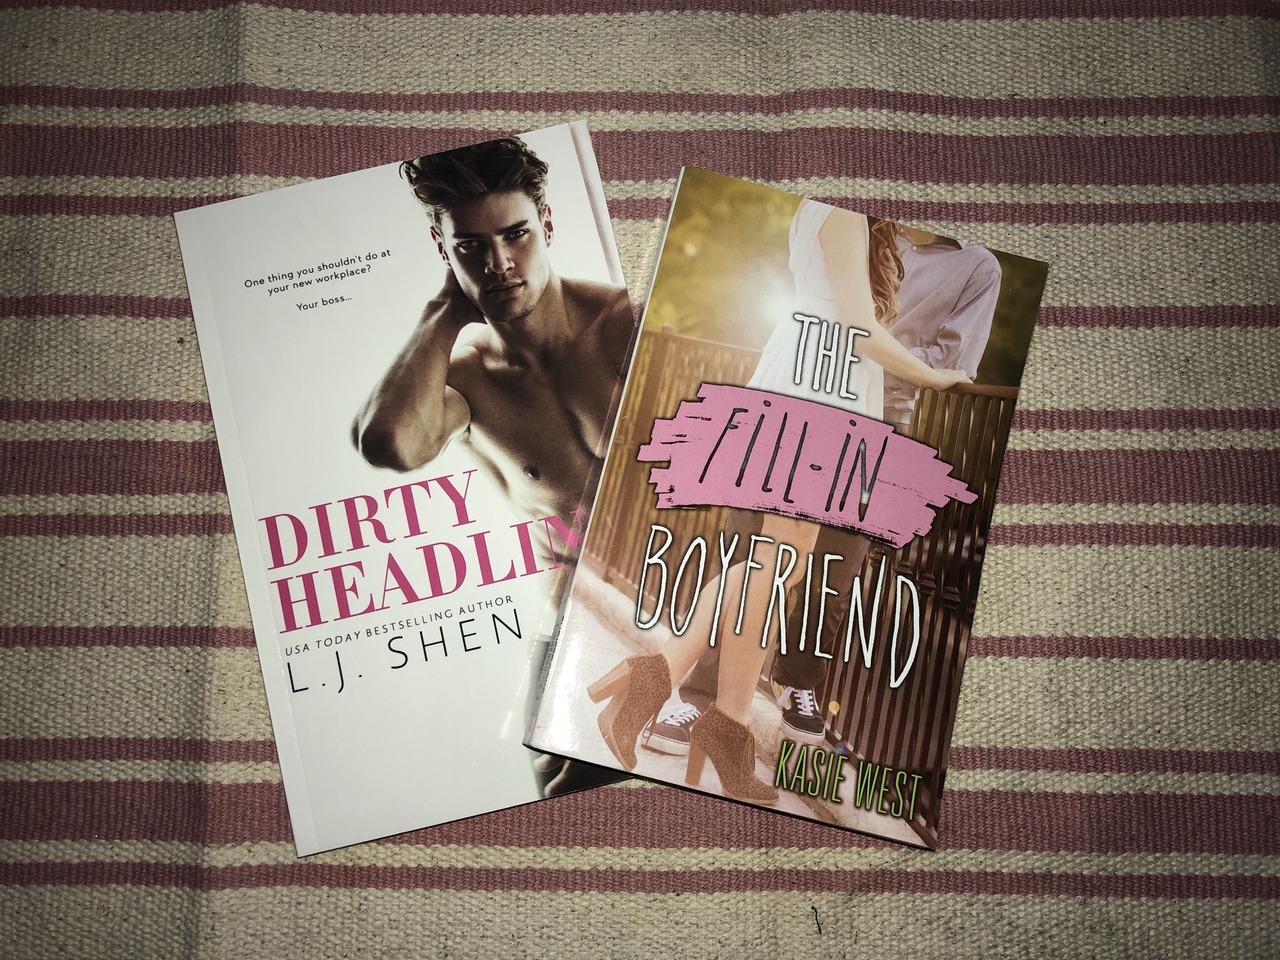 janareviews:
“ Book Mail! The Fill-In Boyfriend by Kasie West (my first one by her that I read 3 years ago)
Dirty Headlines by LJ Shen (so good!!)
Have some more books coming soon, so get ready for the pictures! (I may or may not have gone a little...